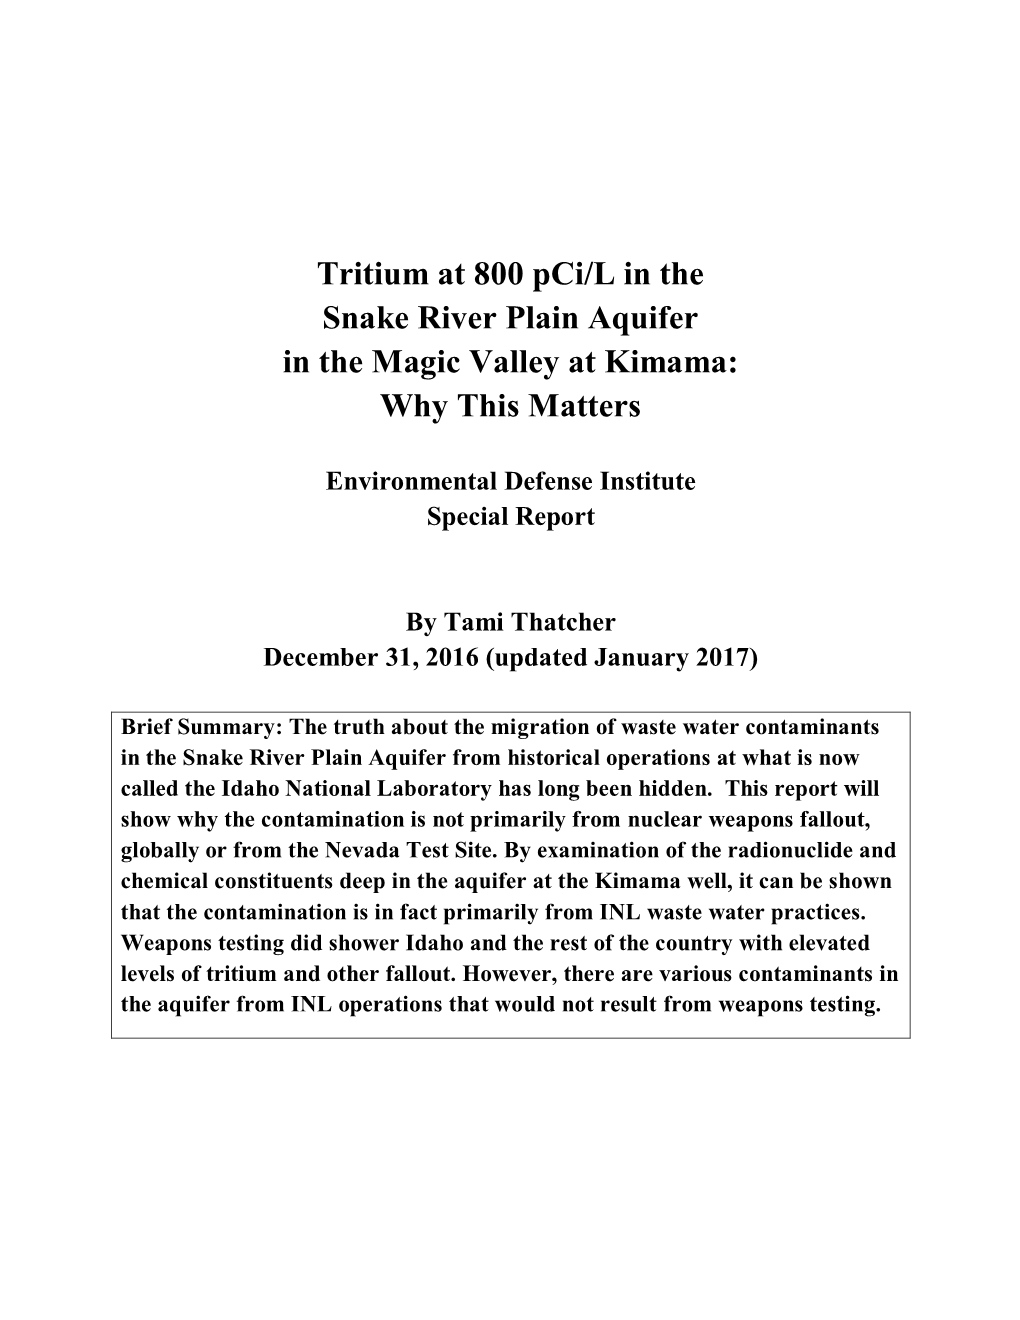 Tritium at 800 Pci/L in the Snake River Plain Aquifer in the Magic Valley at Kimama: Why This Matters